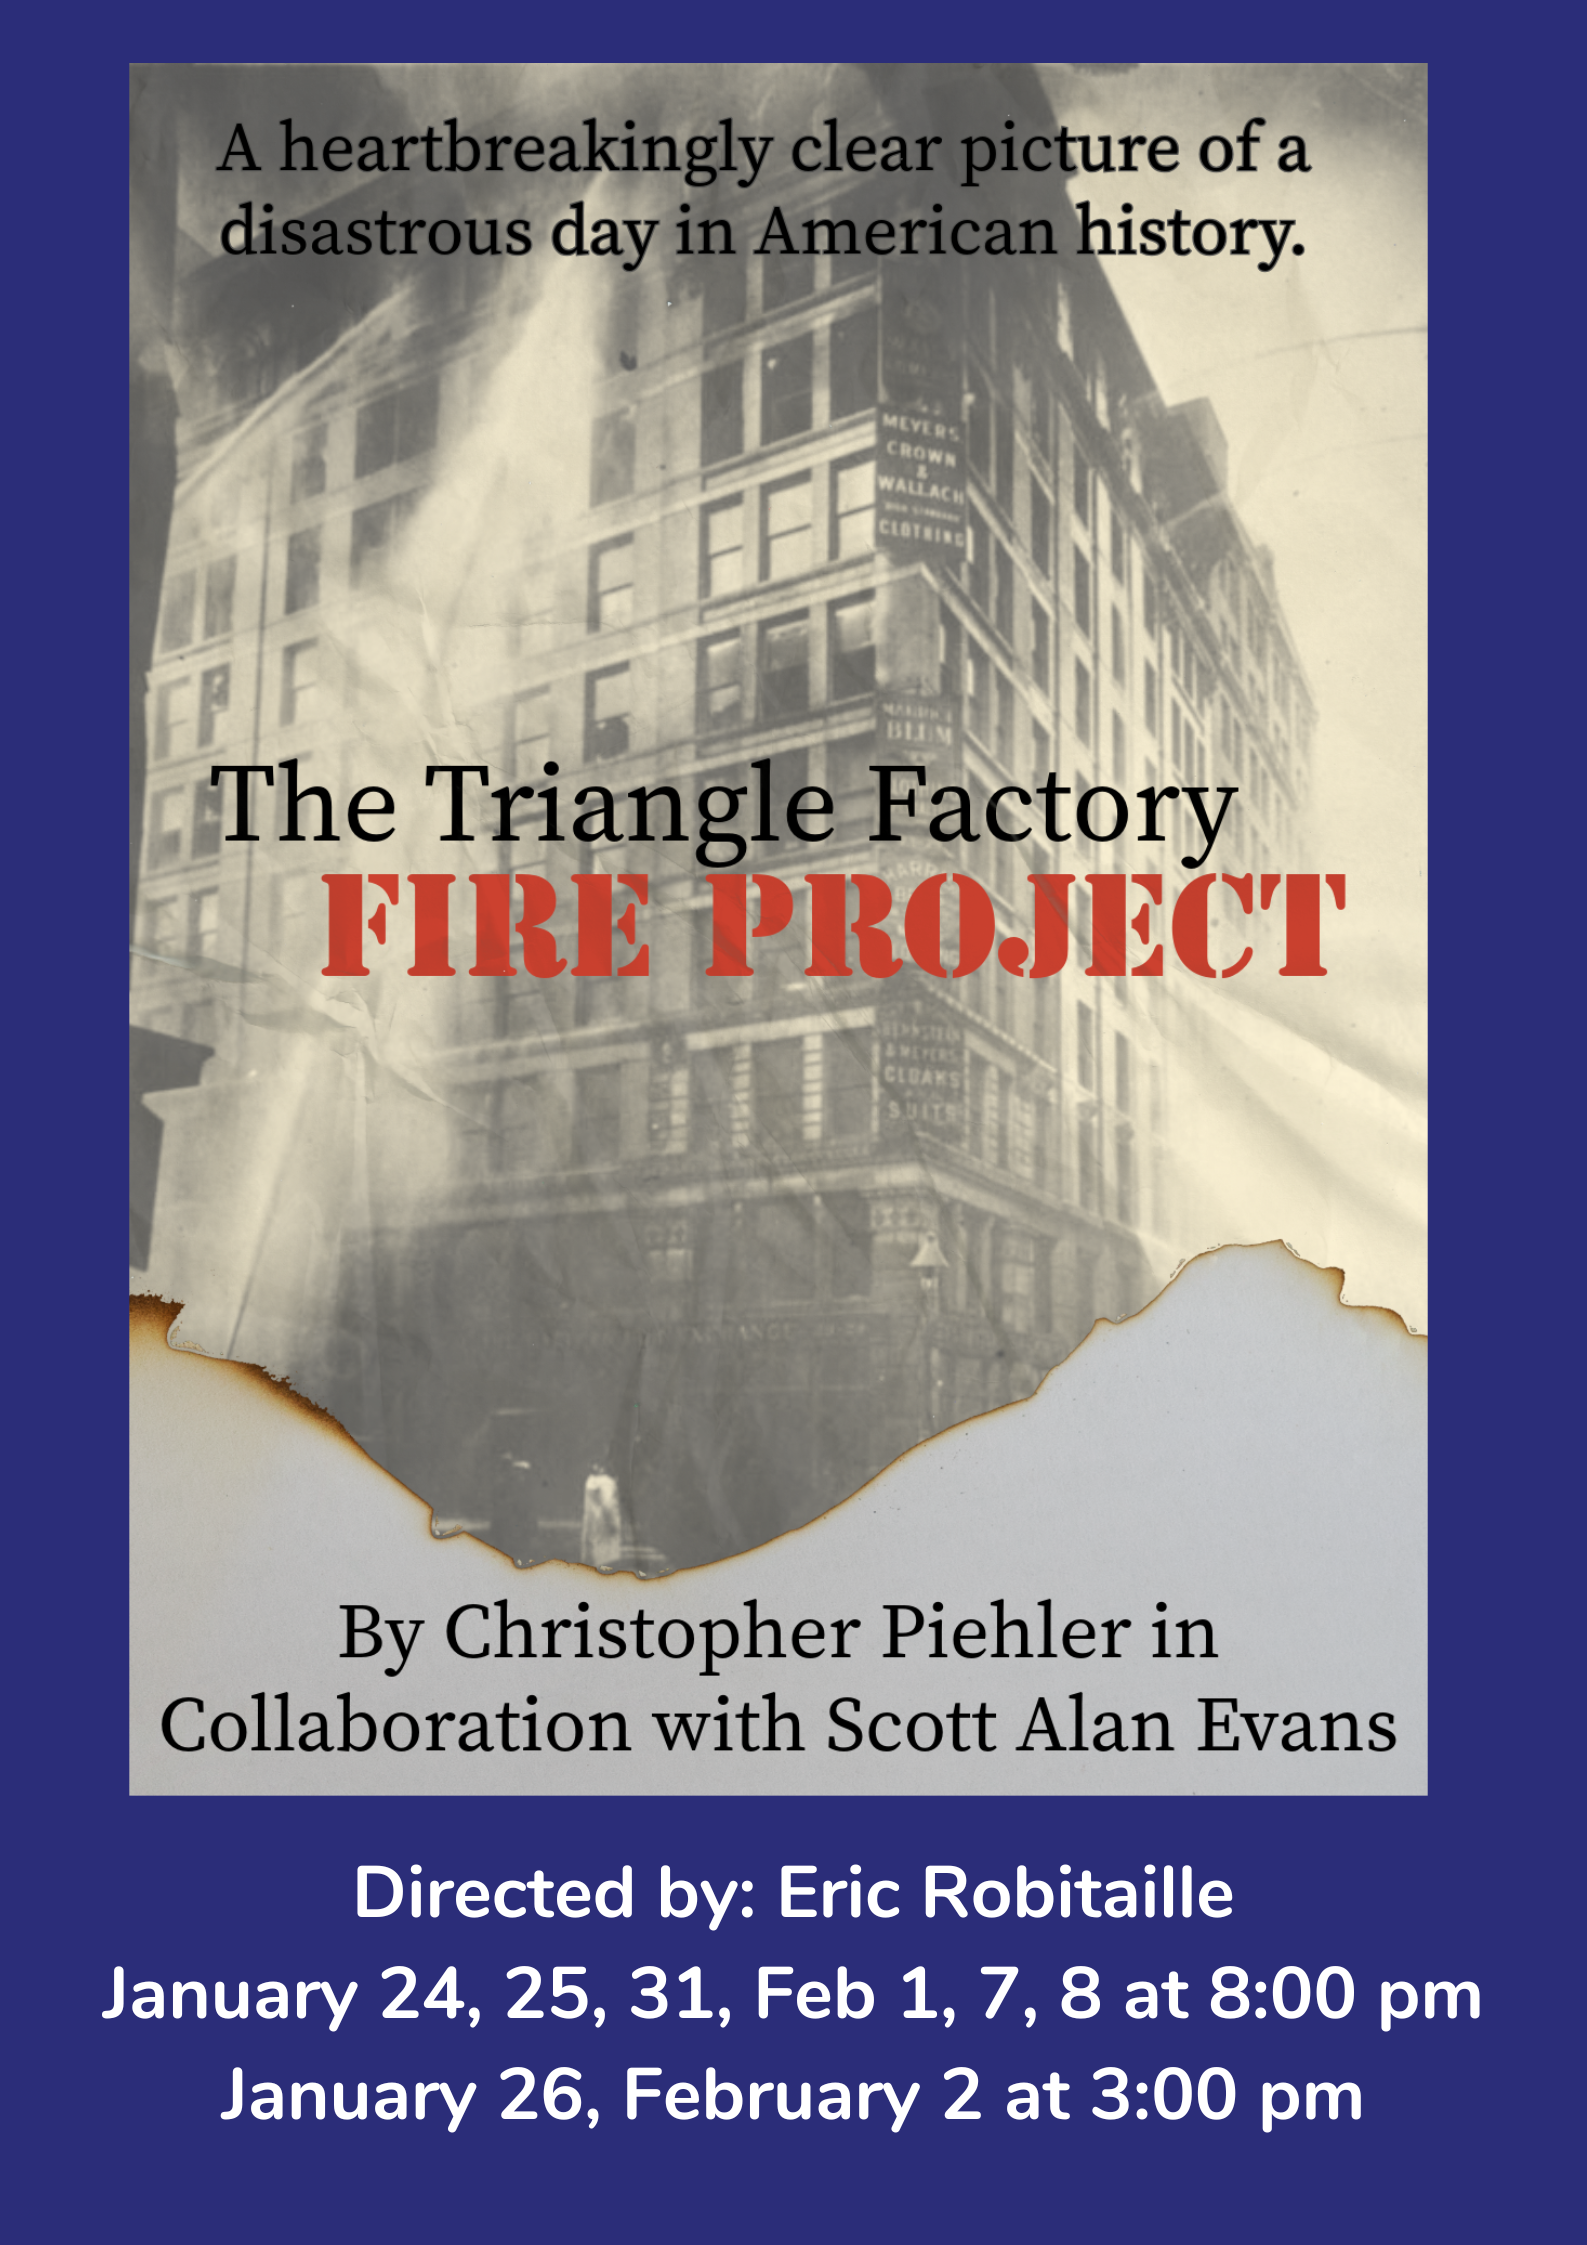 The Triangle Factory Fire Project By Christopher Piehler in collaboration with Scott Alan Evans January 24, 25, 26, 31, Feb 1, 2, 7, 8 Director Eric Robitaille